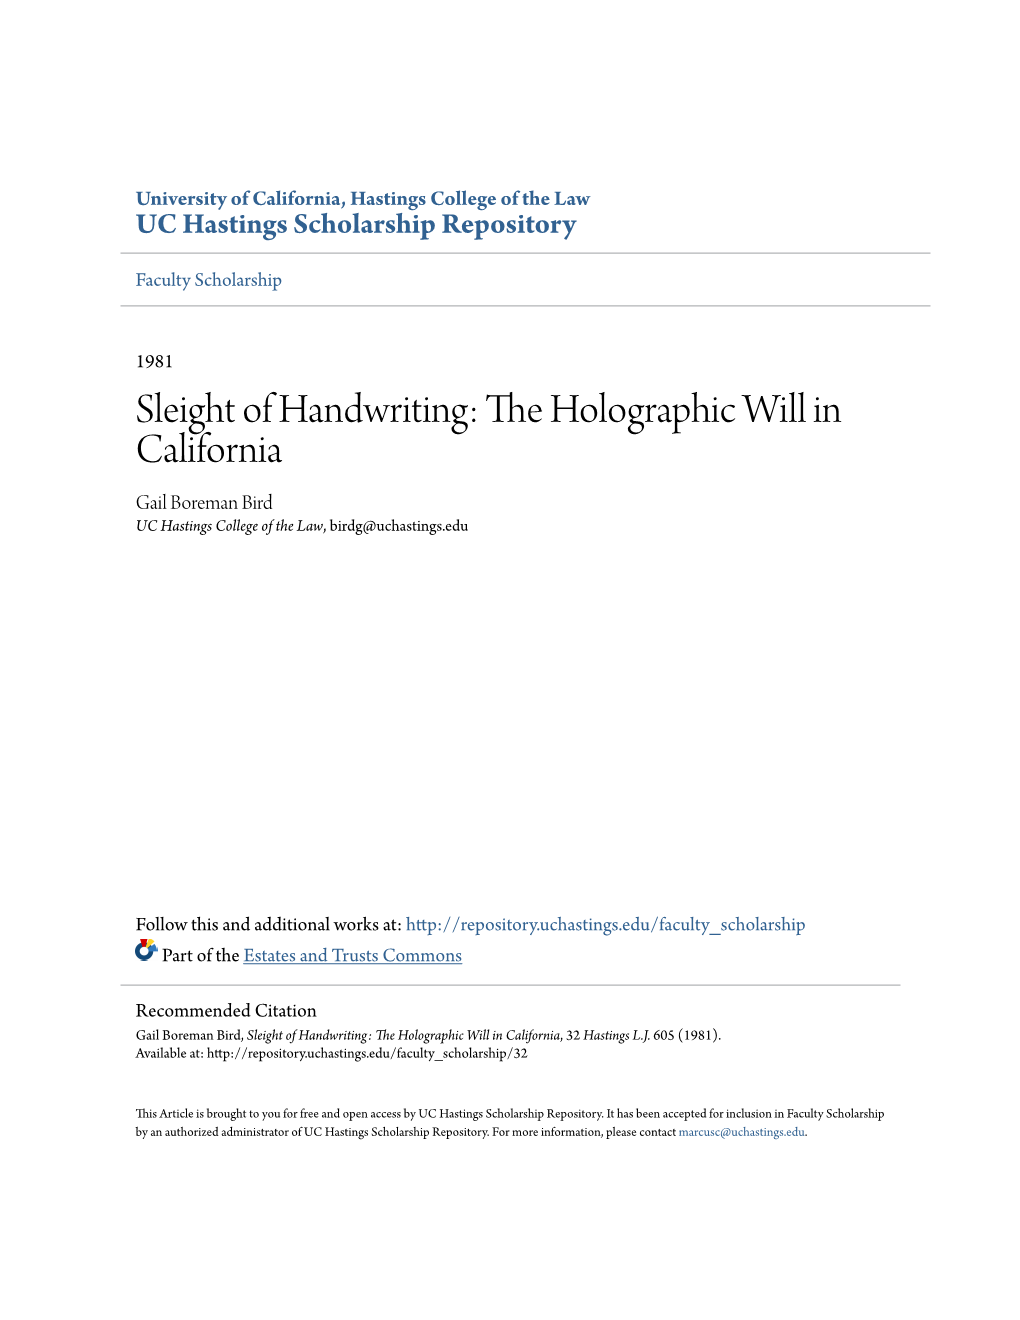 The Holographic Will in California, 32 Hastings L.J